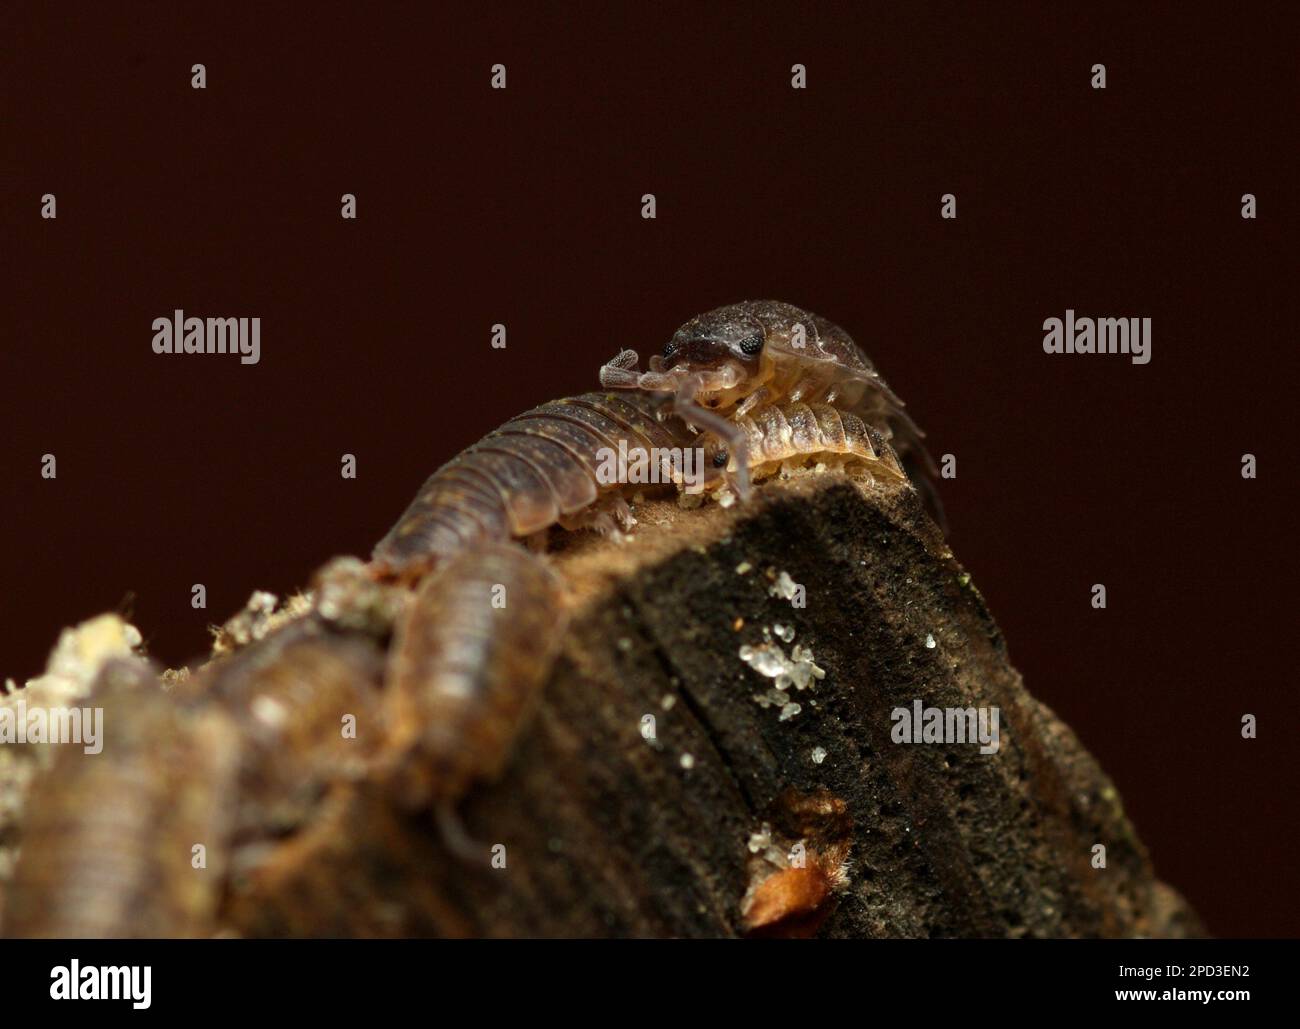 Common Woodlouses (Oniscus asellus) on a piece of wood, Macrophotography Arthropods, Isopods, Mauerassel, Assel Stock Photo